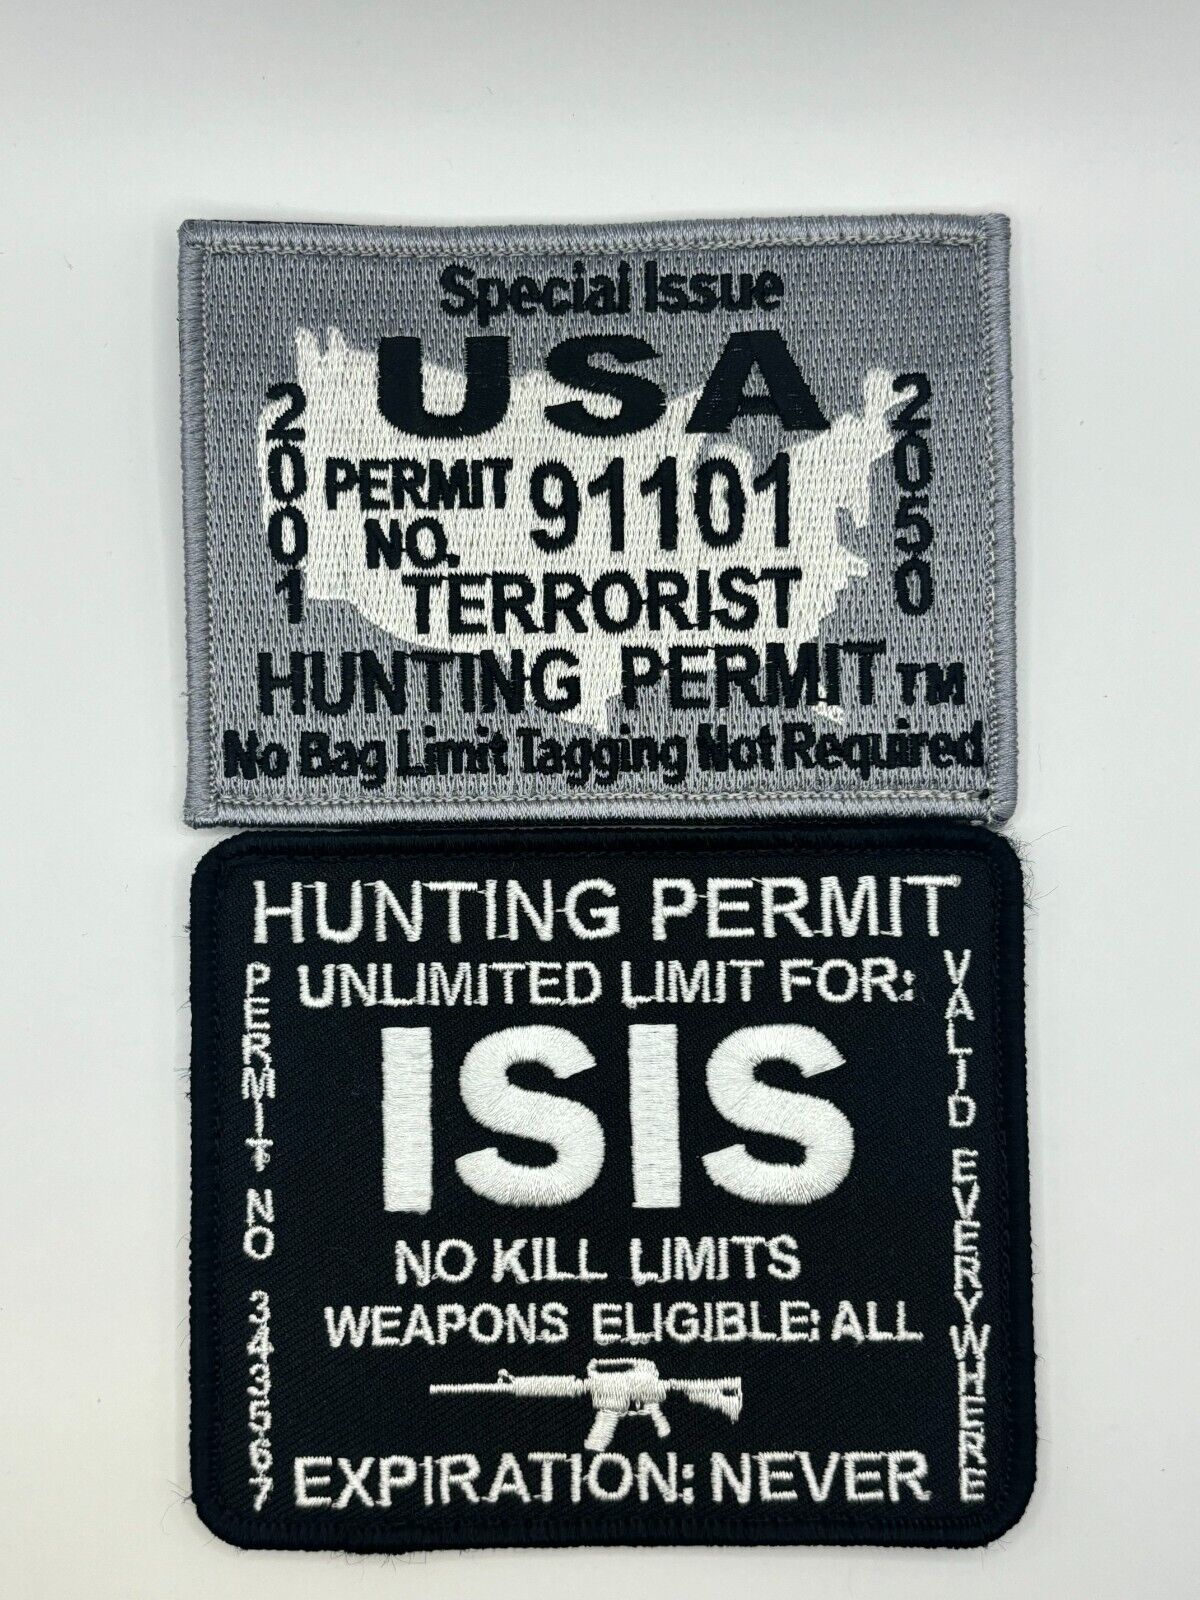 USA ISIS HUNTING PERMIT 2 PIECE 9.99 HOOK